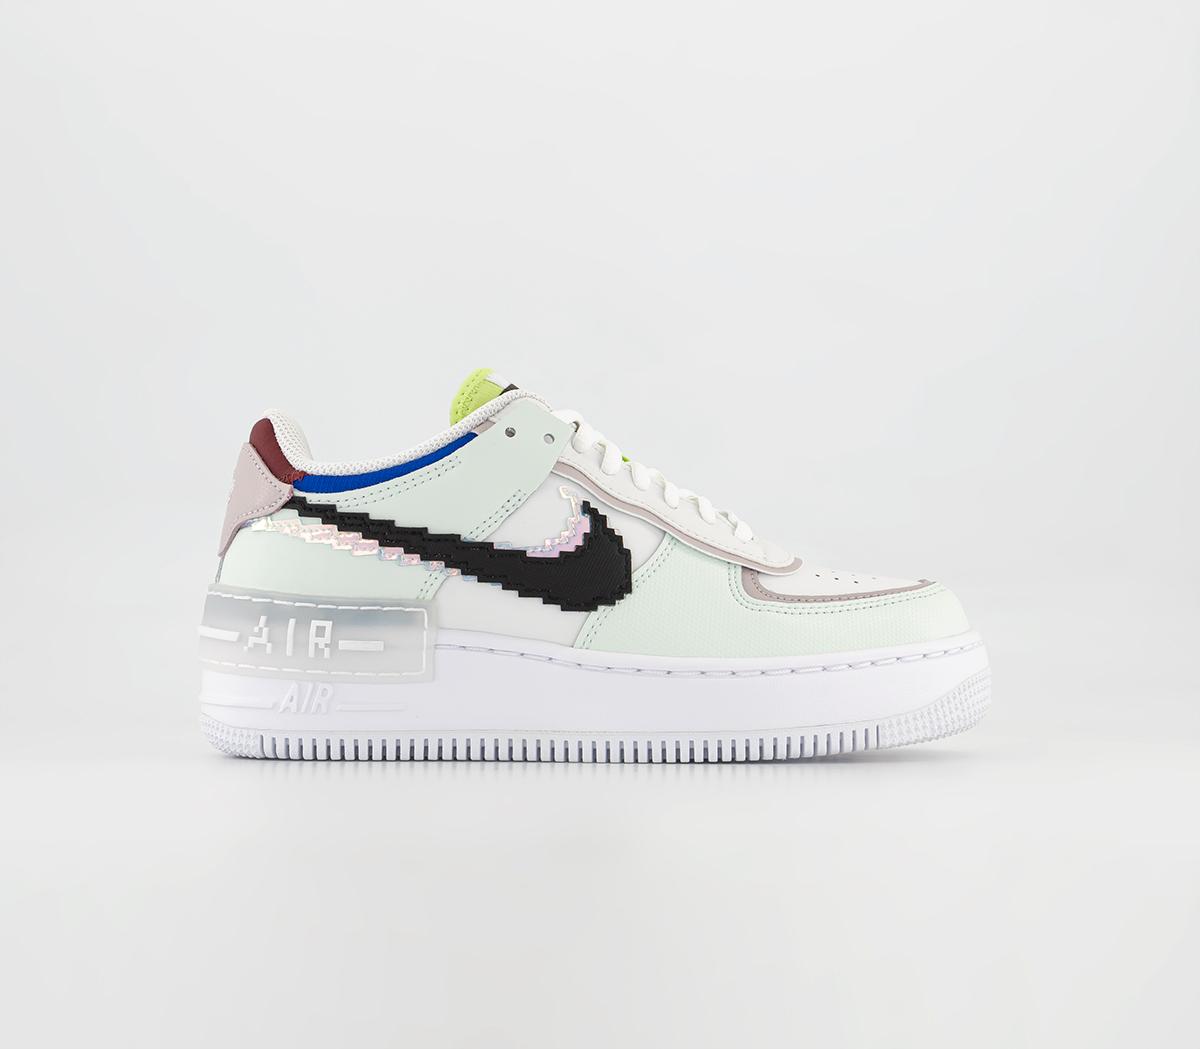 NikeAir Force 1 Shadow Trainers Barely Green Black White Platinum Violet